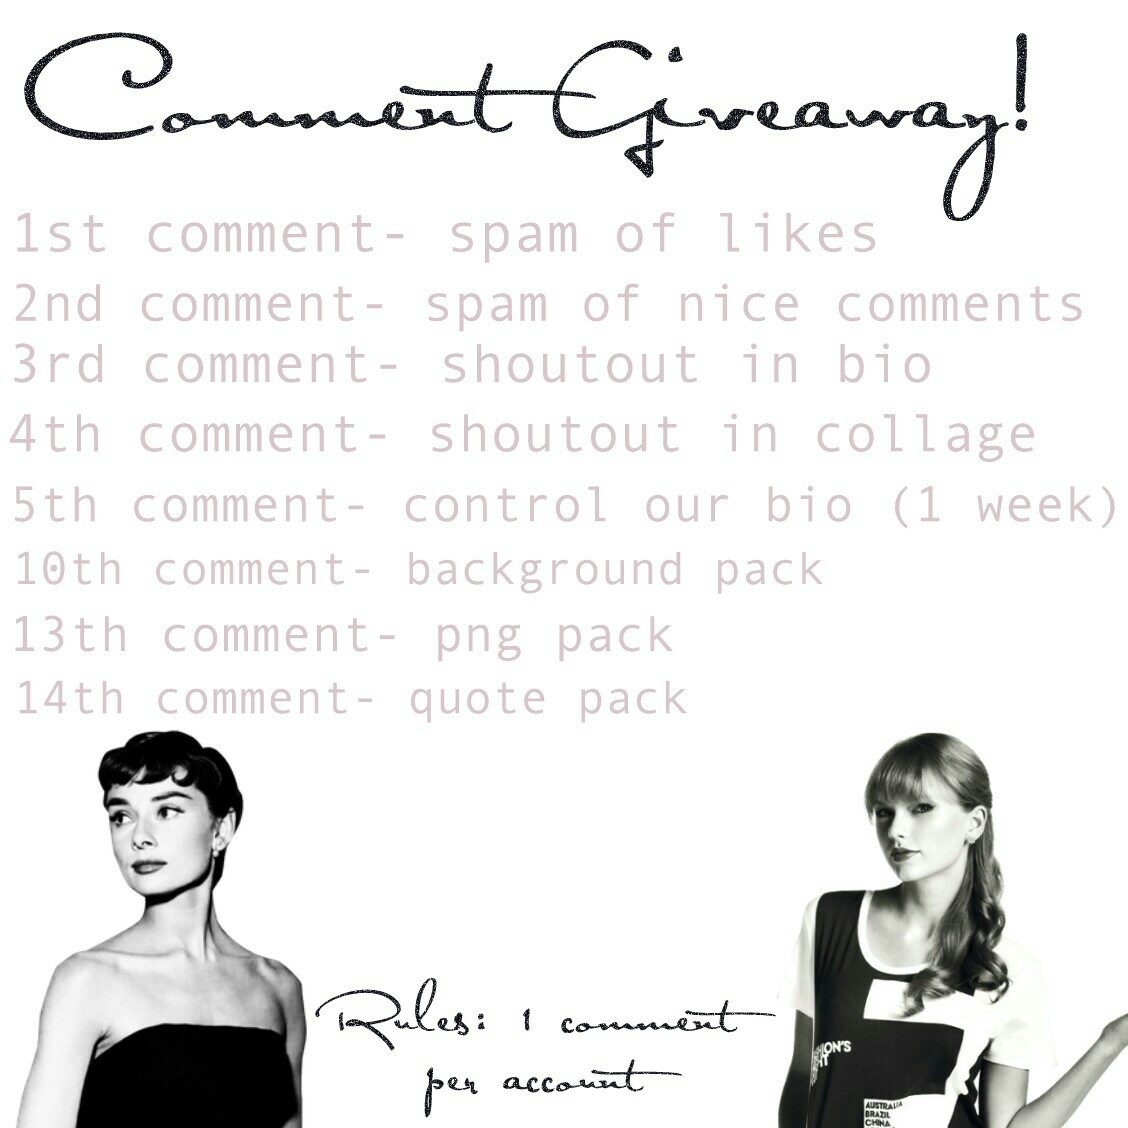 Comment Giveaway! Just comment to enter!